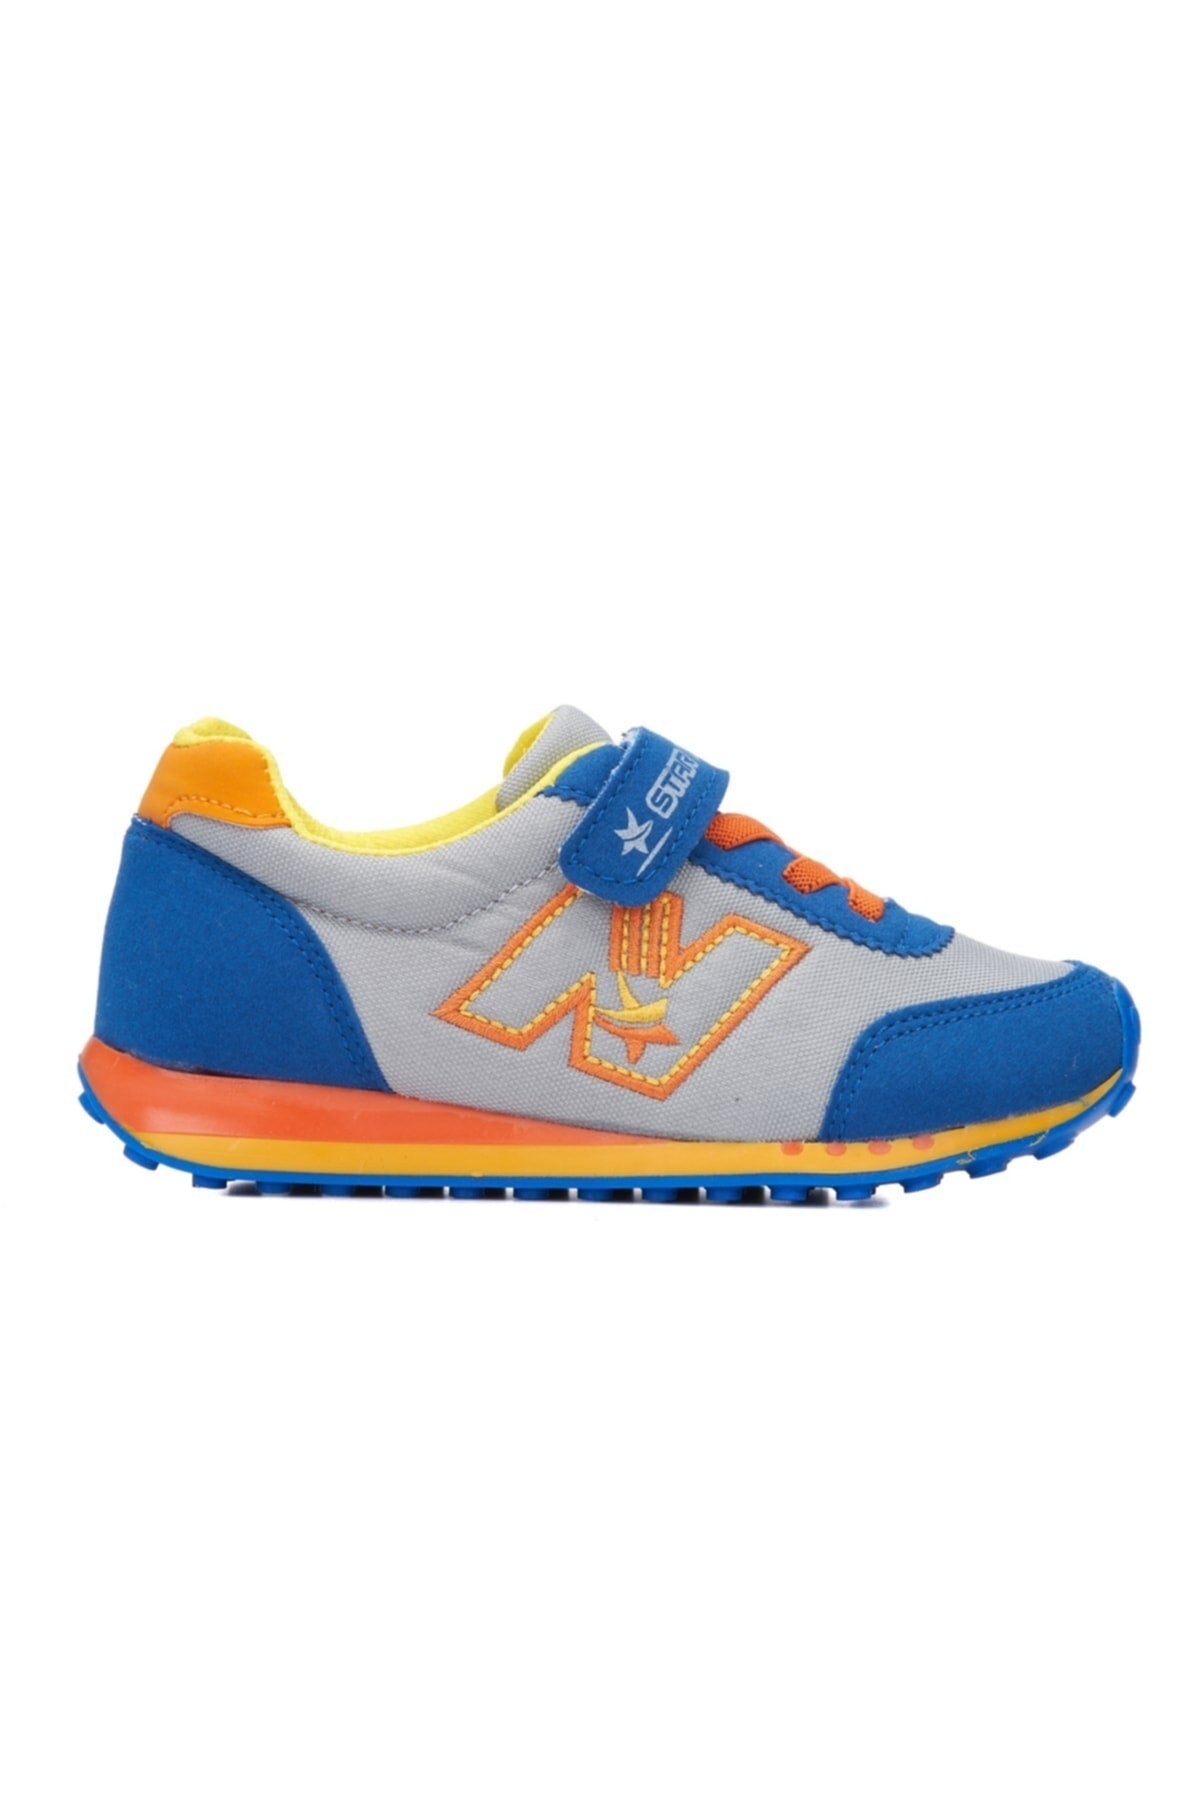 Blue - Children's Sport Shoes Call and Laced Daily Casual Sneaker